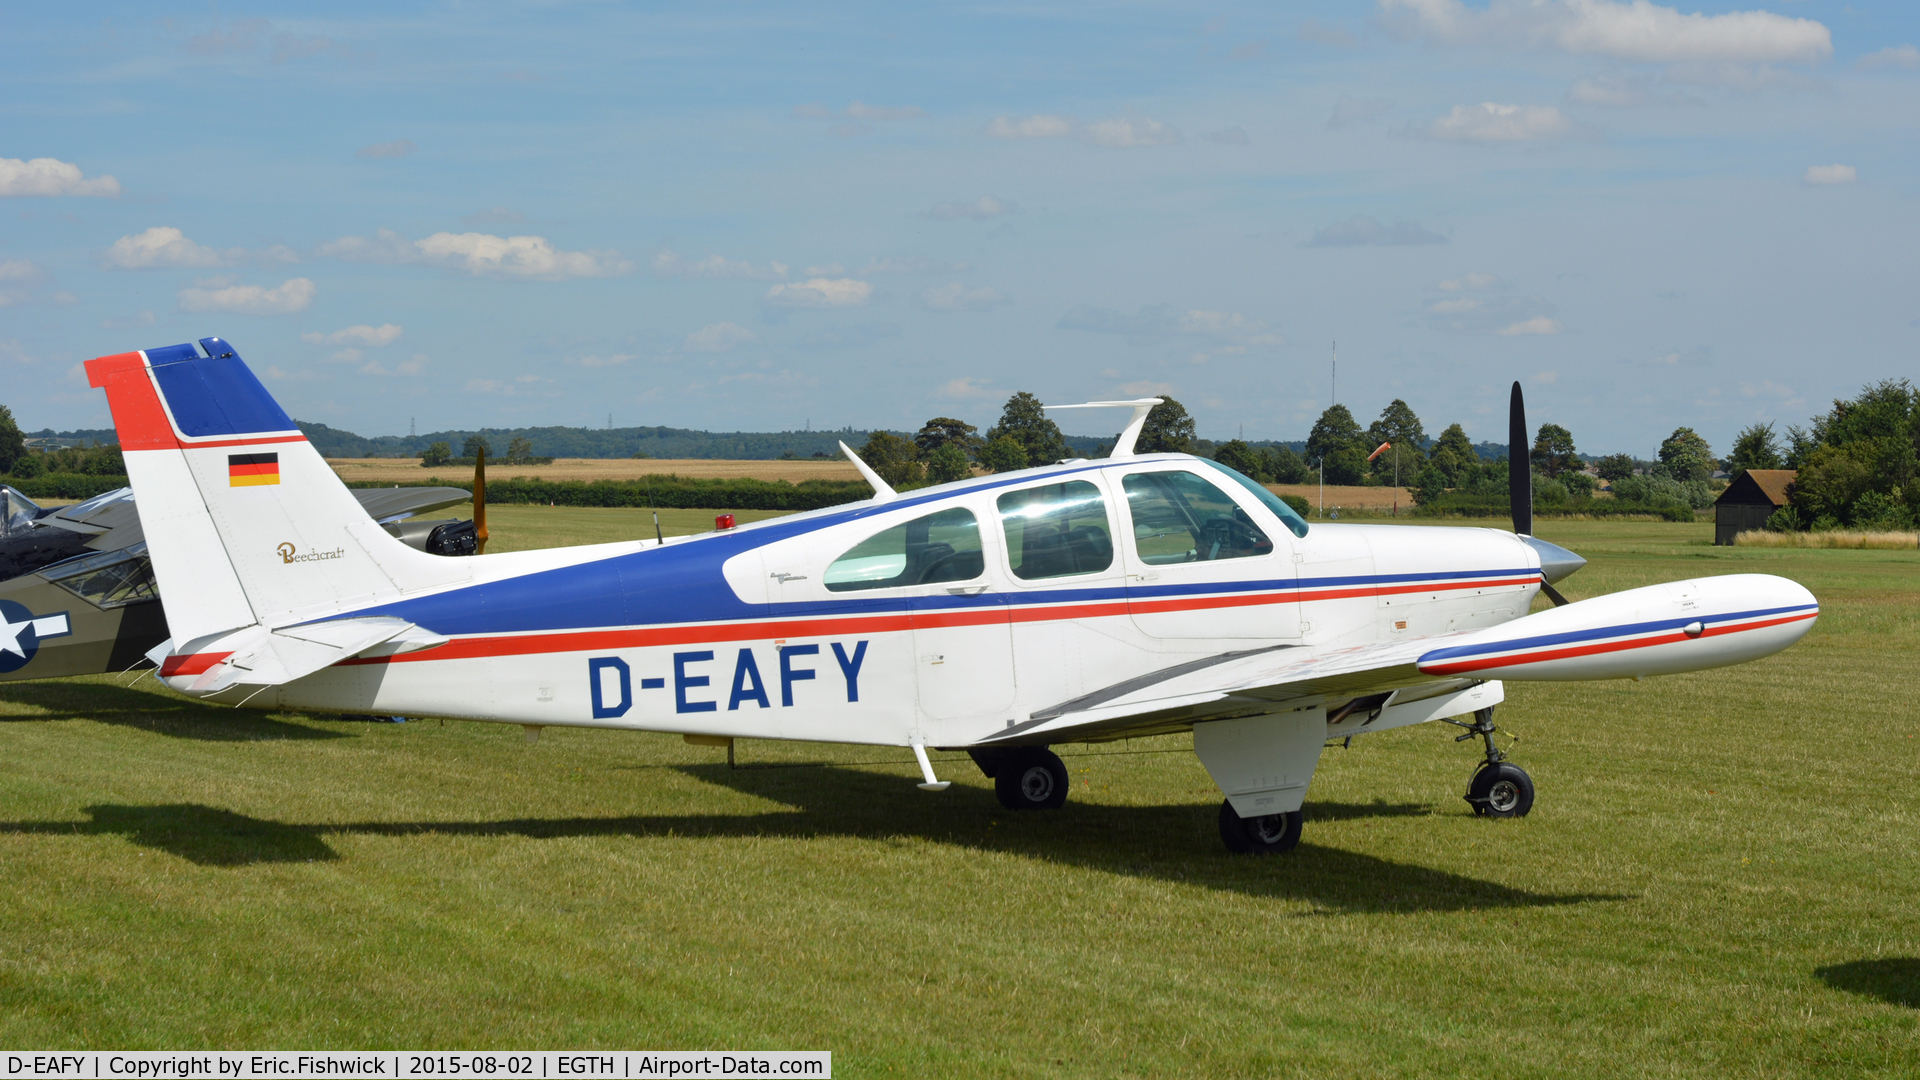 D-EAFY, 1967 Beech C33A Debonair C/N CE-176, 2. D-EAFY on the flight line at The Shuttleworth Wings and Wheels Airshow, Aug. 2015.